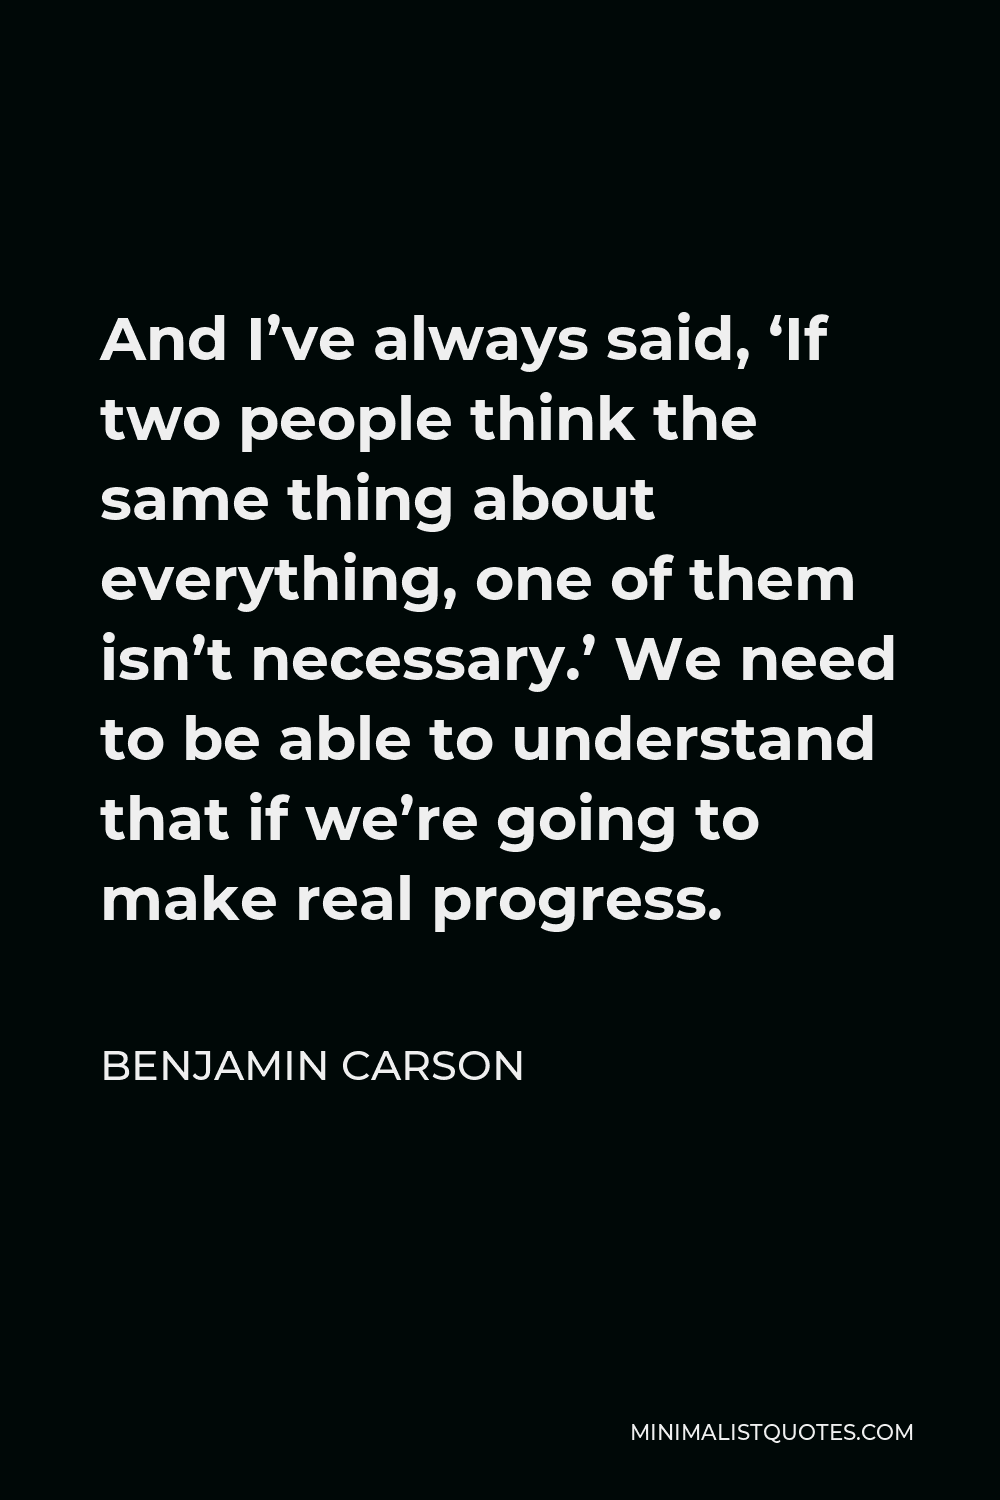 Benjamin Carson Quote - And I’ve always said, ‘If two people think the same thing about everything, one of them isn’t necessary.’ We need to be able to understand that if we’re going to make real progress.